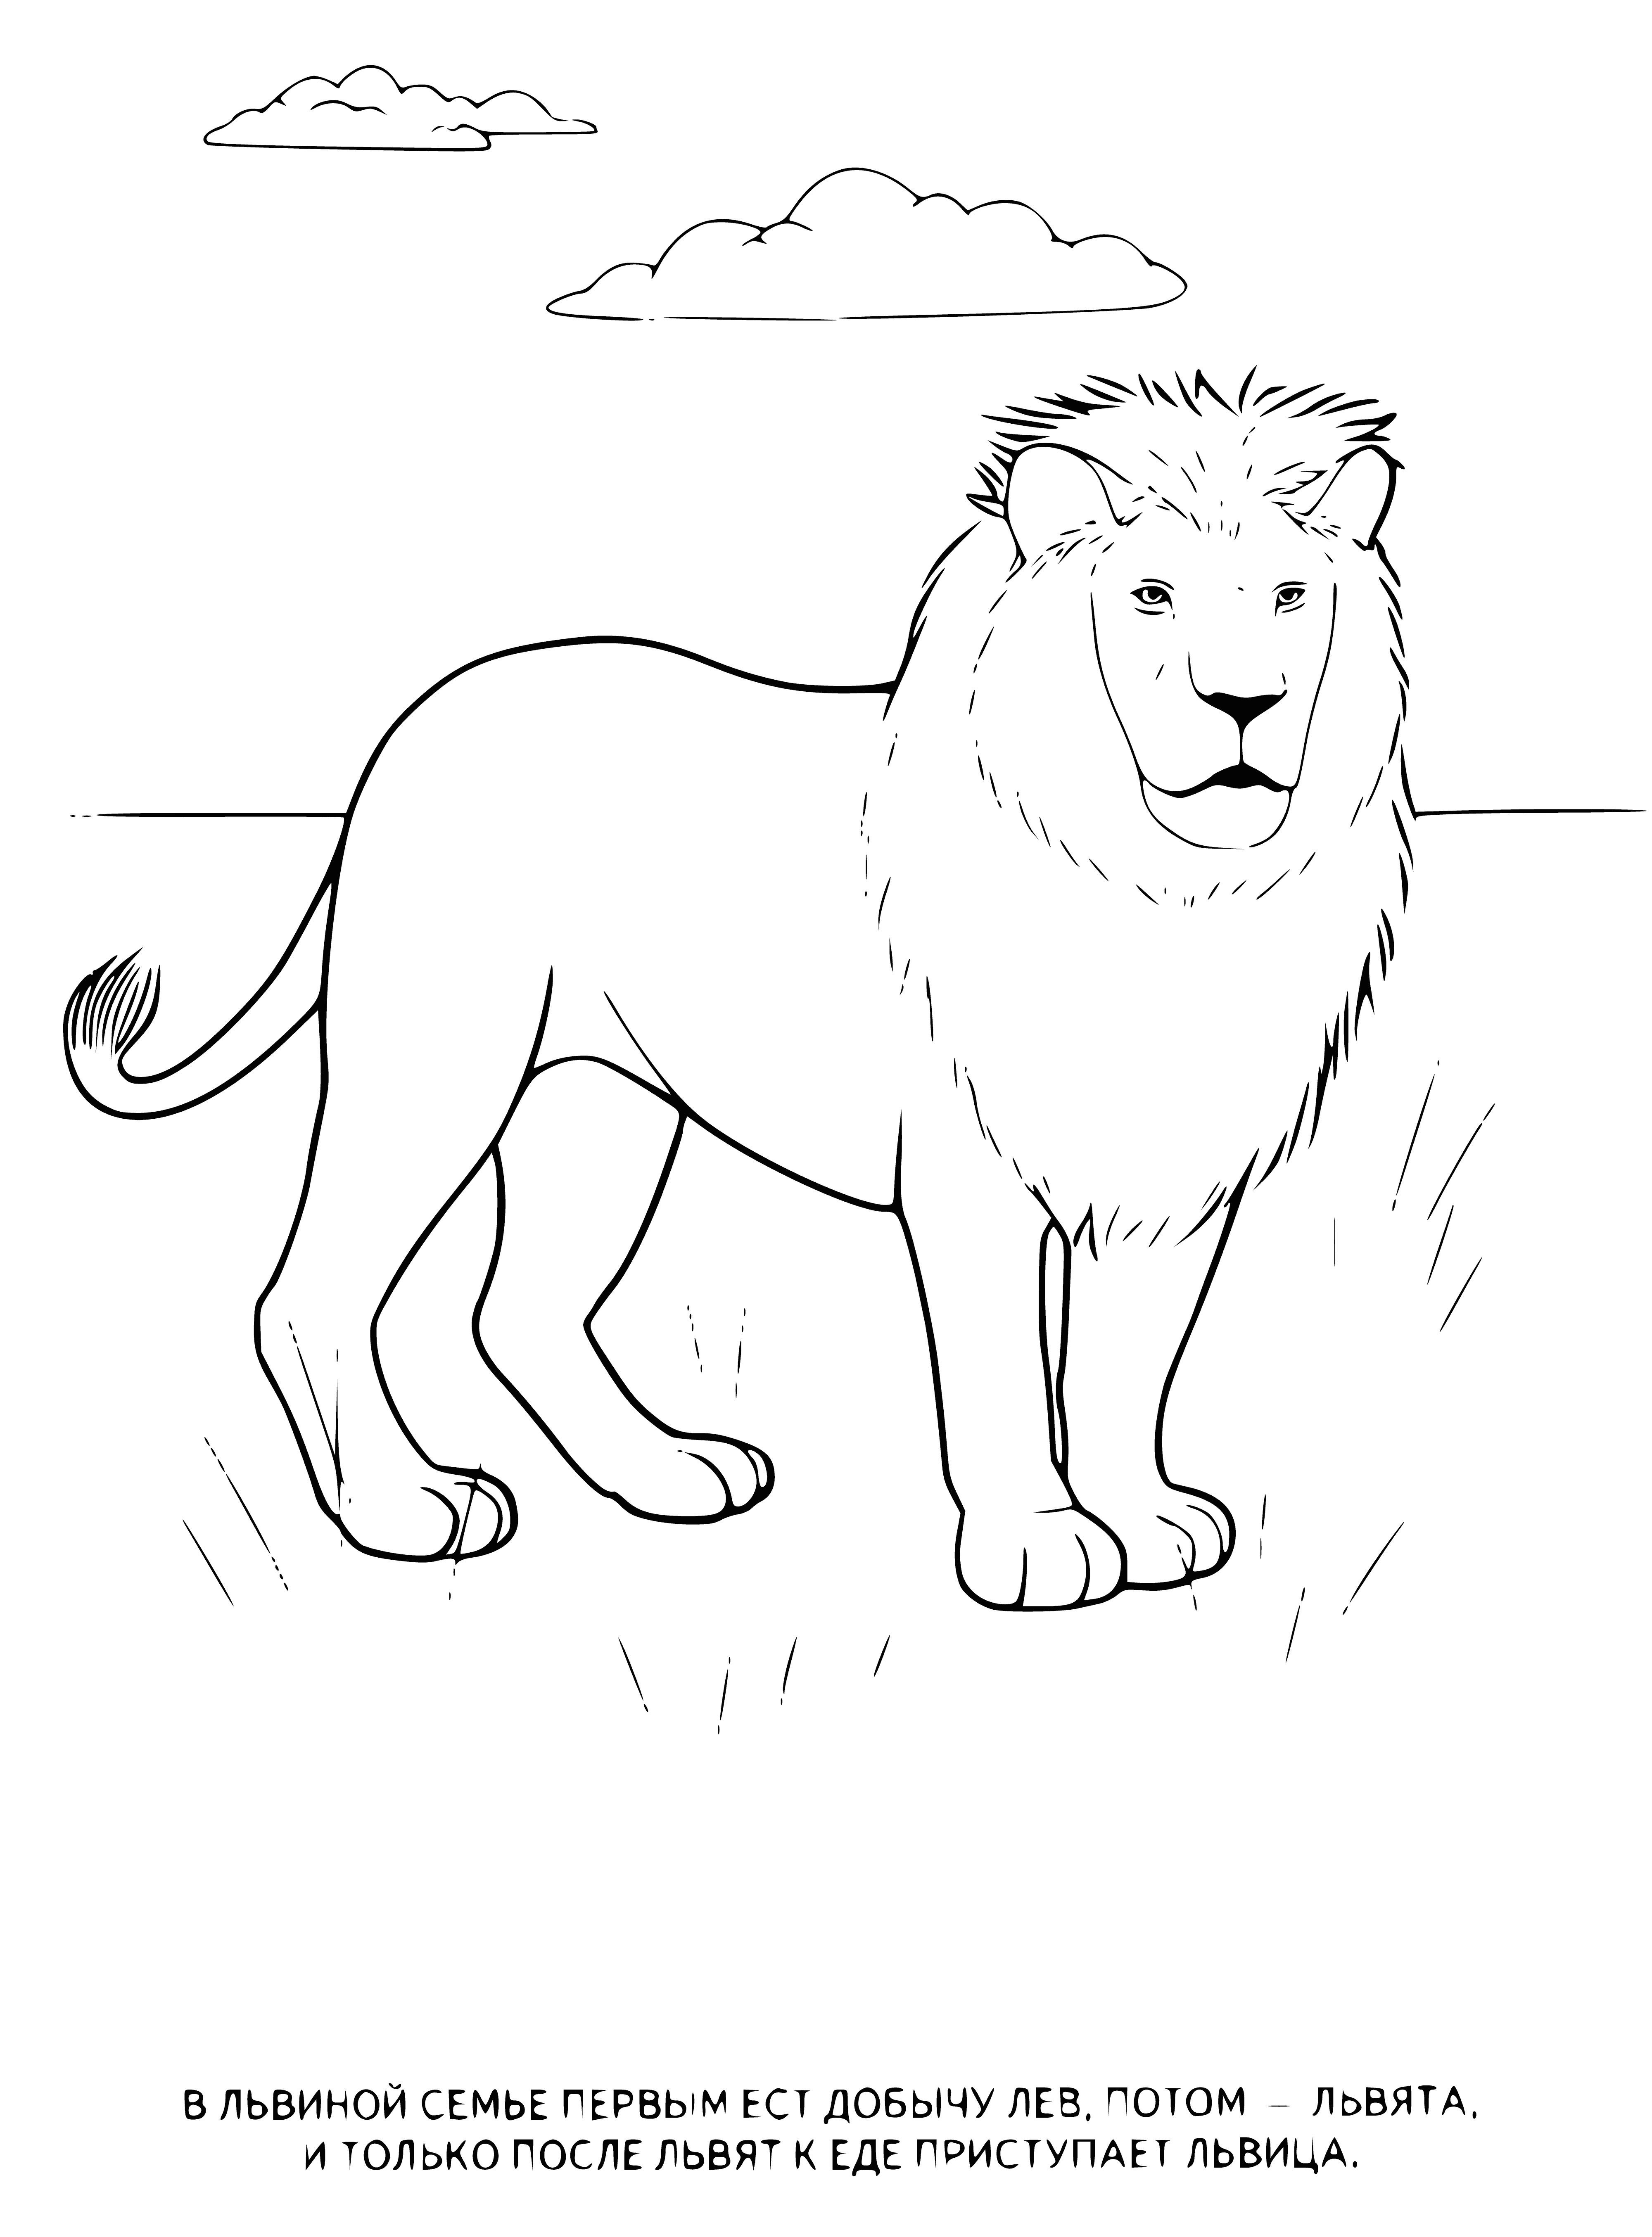 coloring page: 5 animals - 2 lions, 1 elephant, 1 zebra, 1 gorilla - are on this coloring page.